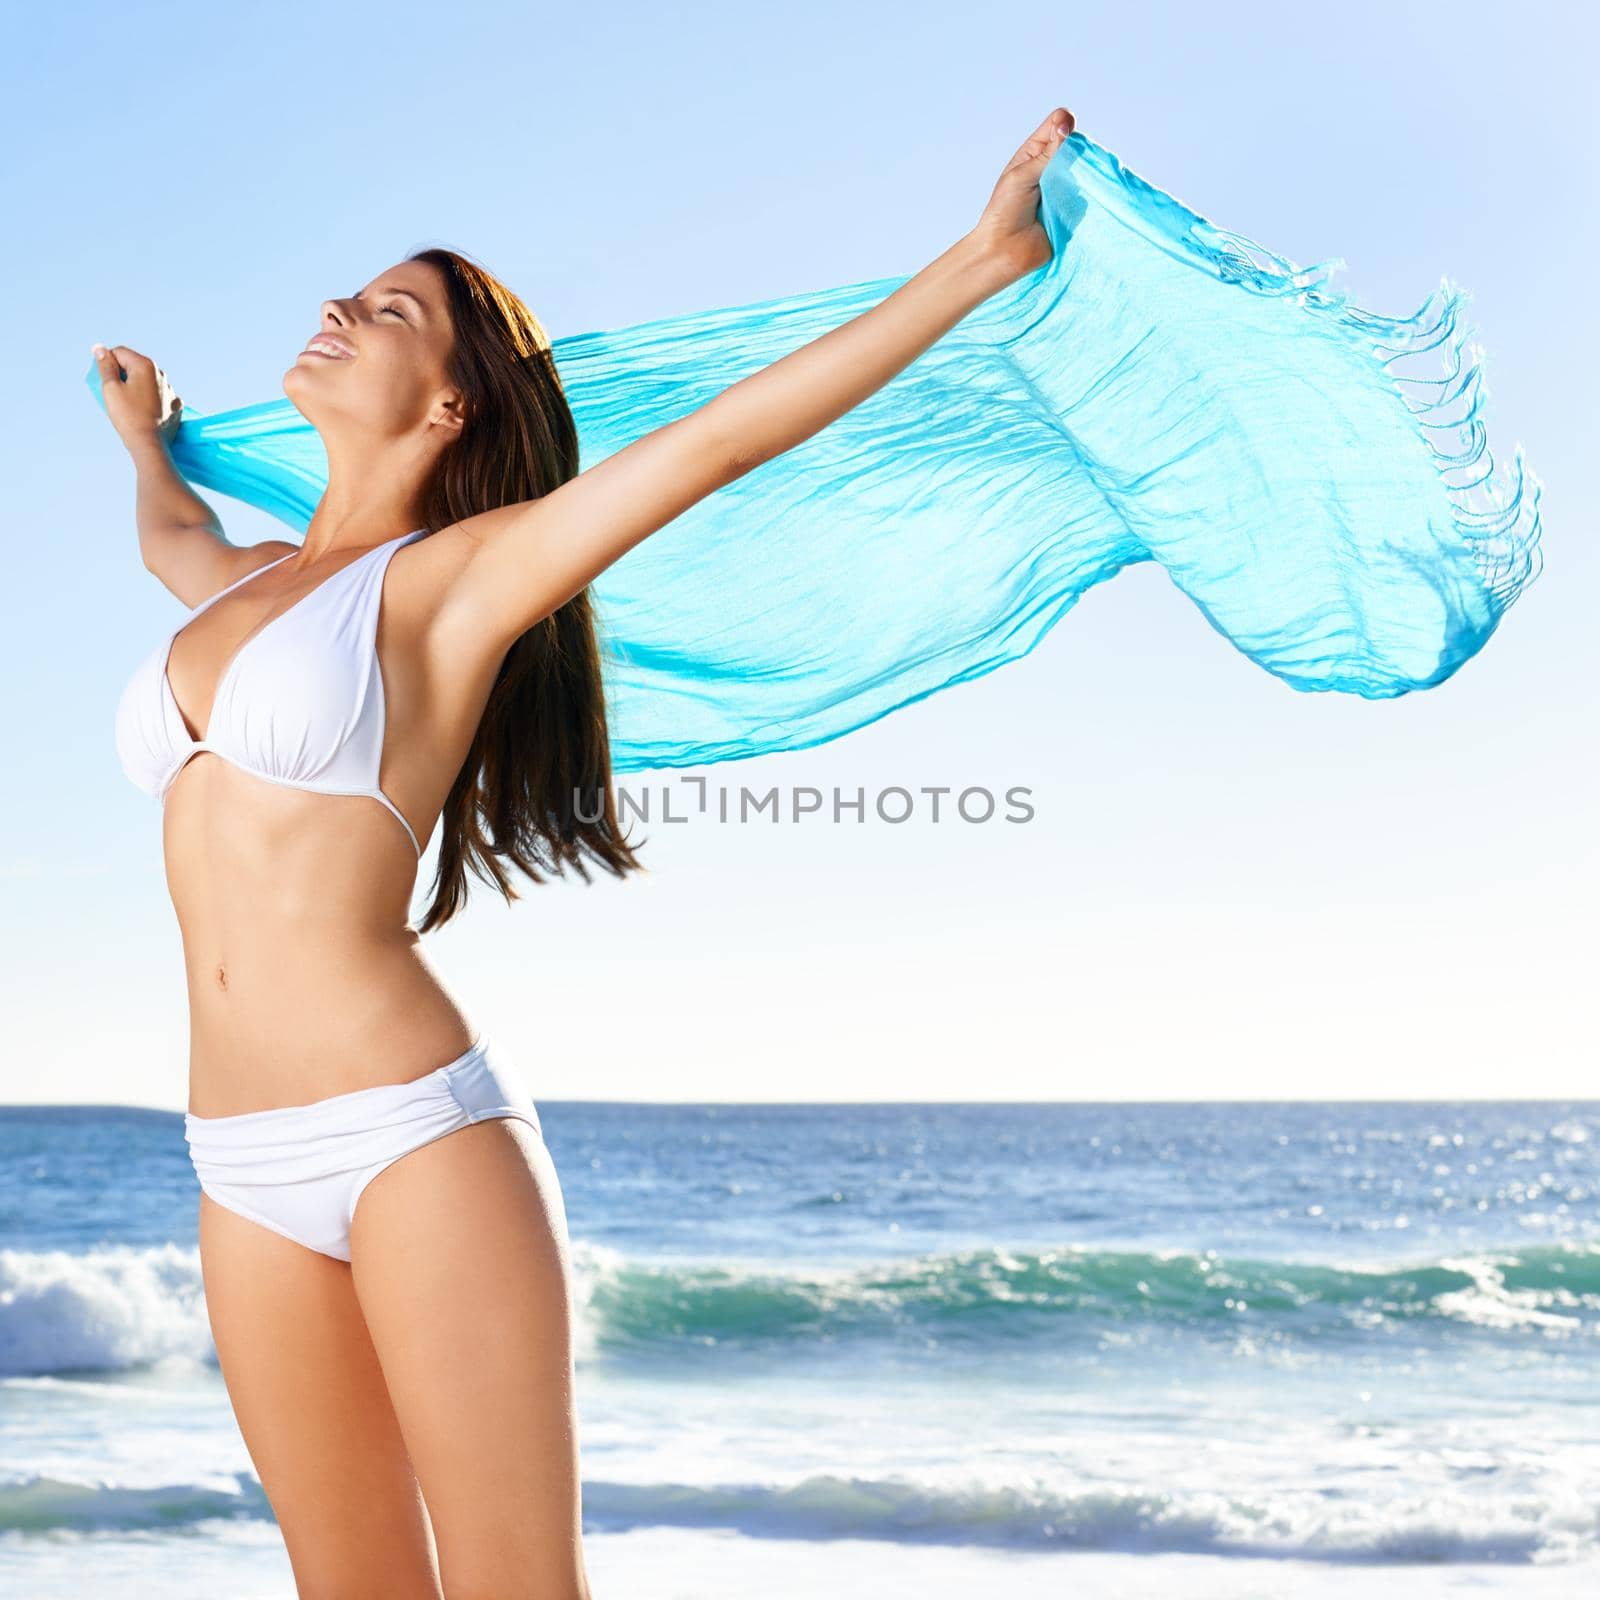 A beautiful young woman holding a sarong thats blowing in the wind.